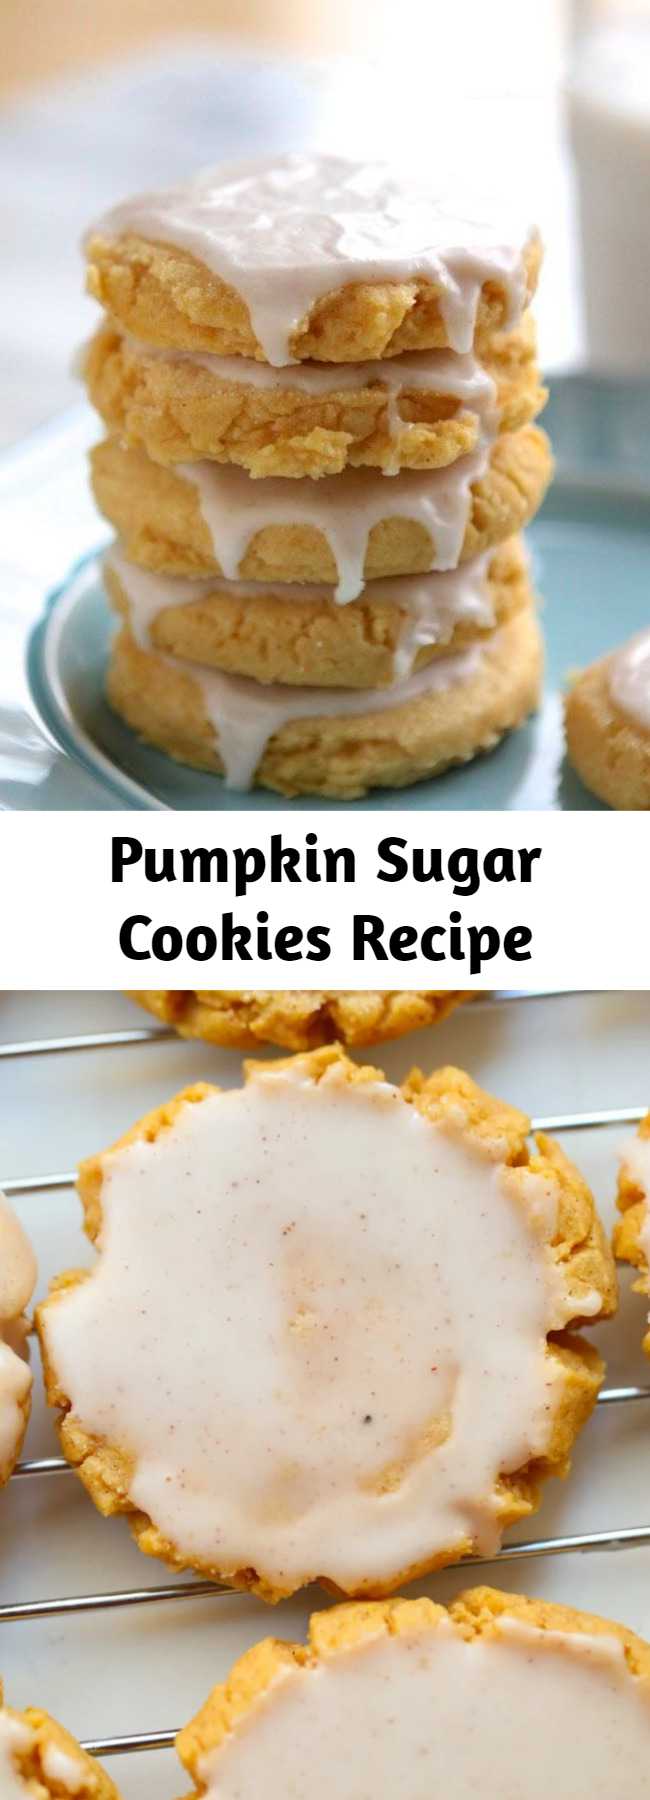 Pumpkin Sugar Cookies Recipe - Sugar Cookies just got better with a little pumpkin! This recipe creates soft, chewy, lightly spicy glazed pumpkin sugar cookies that are perfect for Fall!